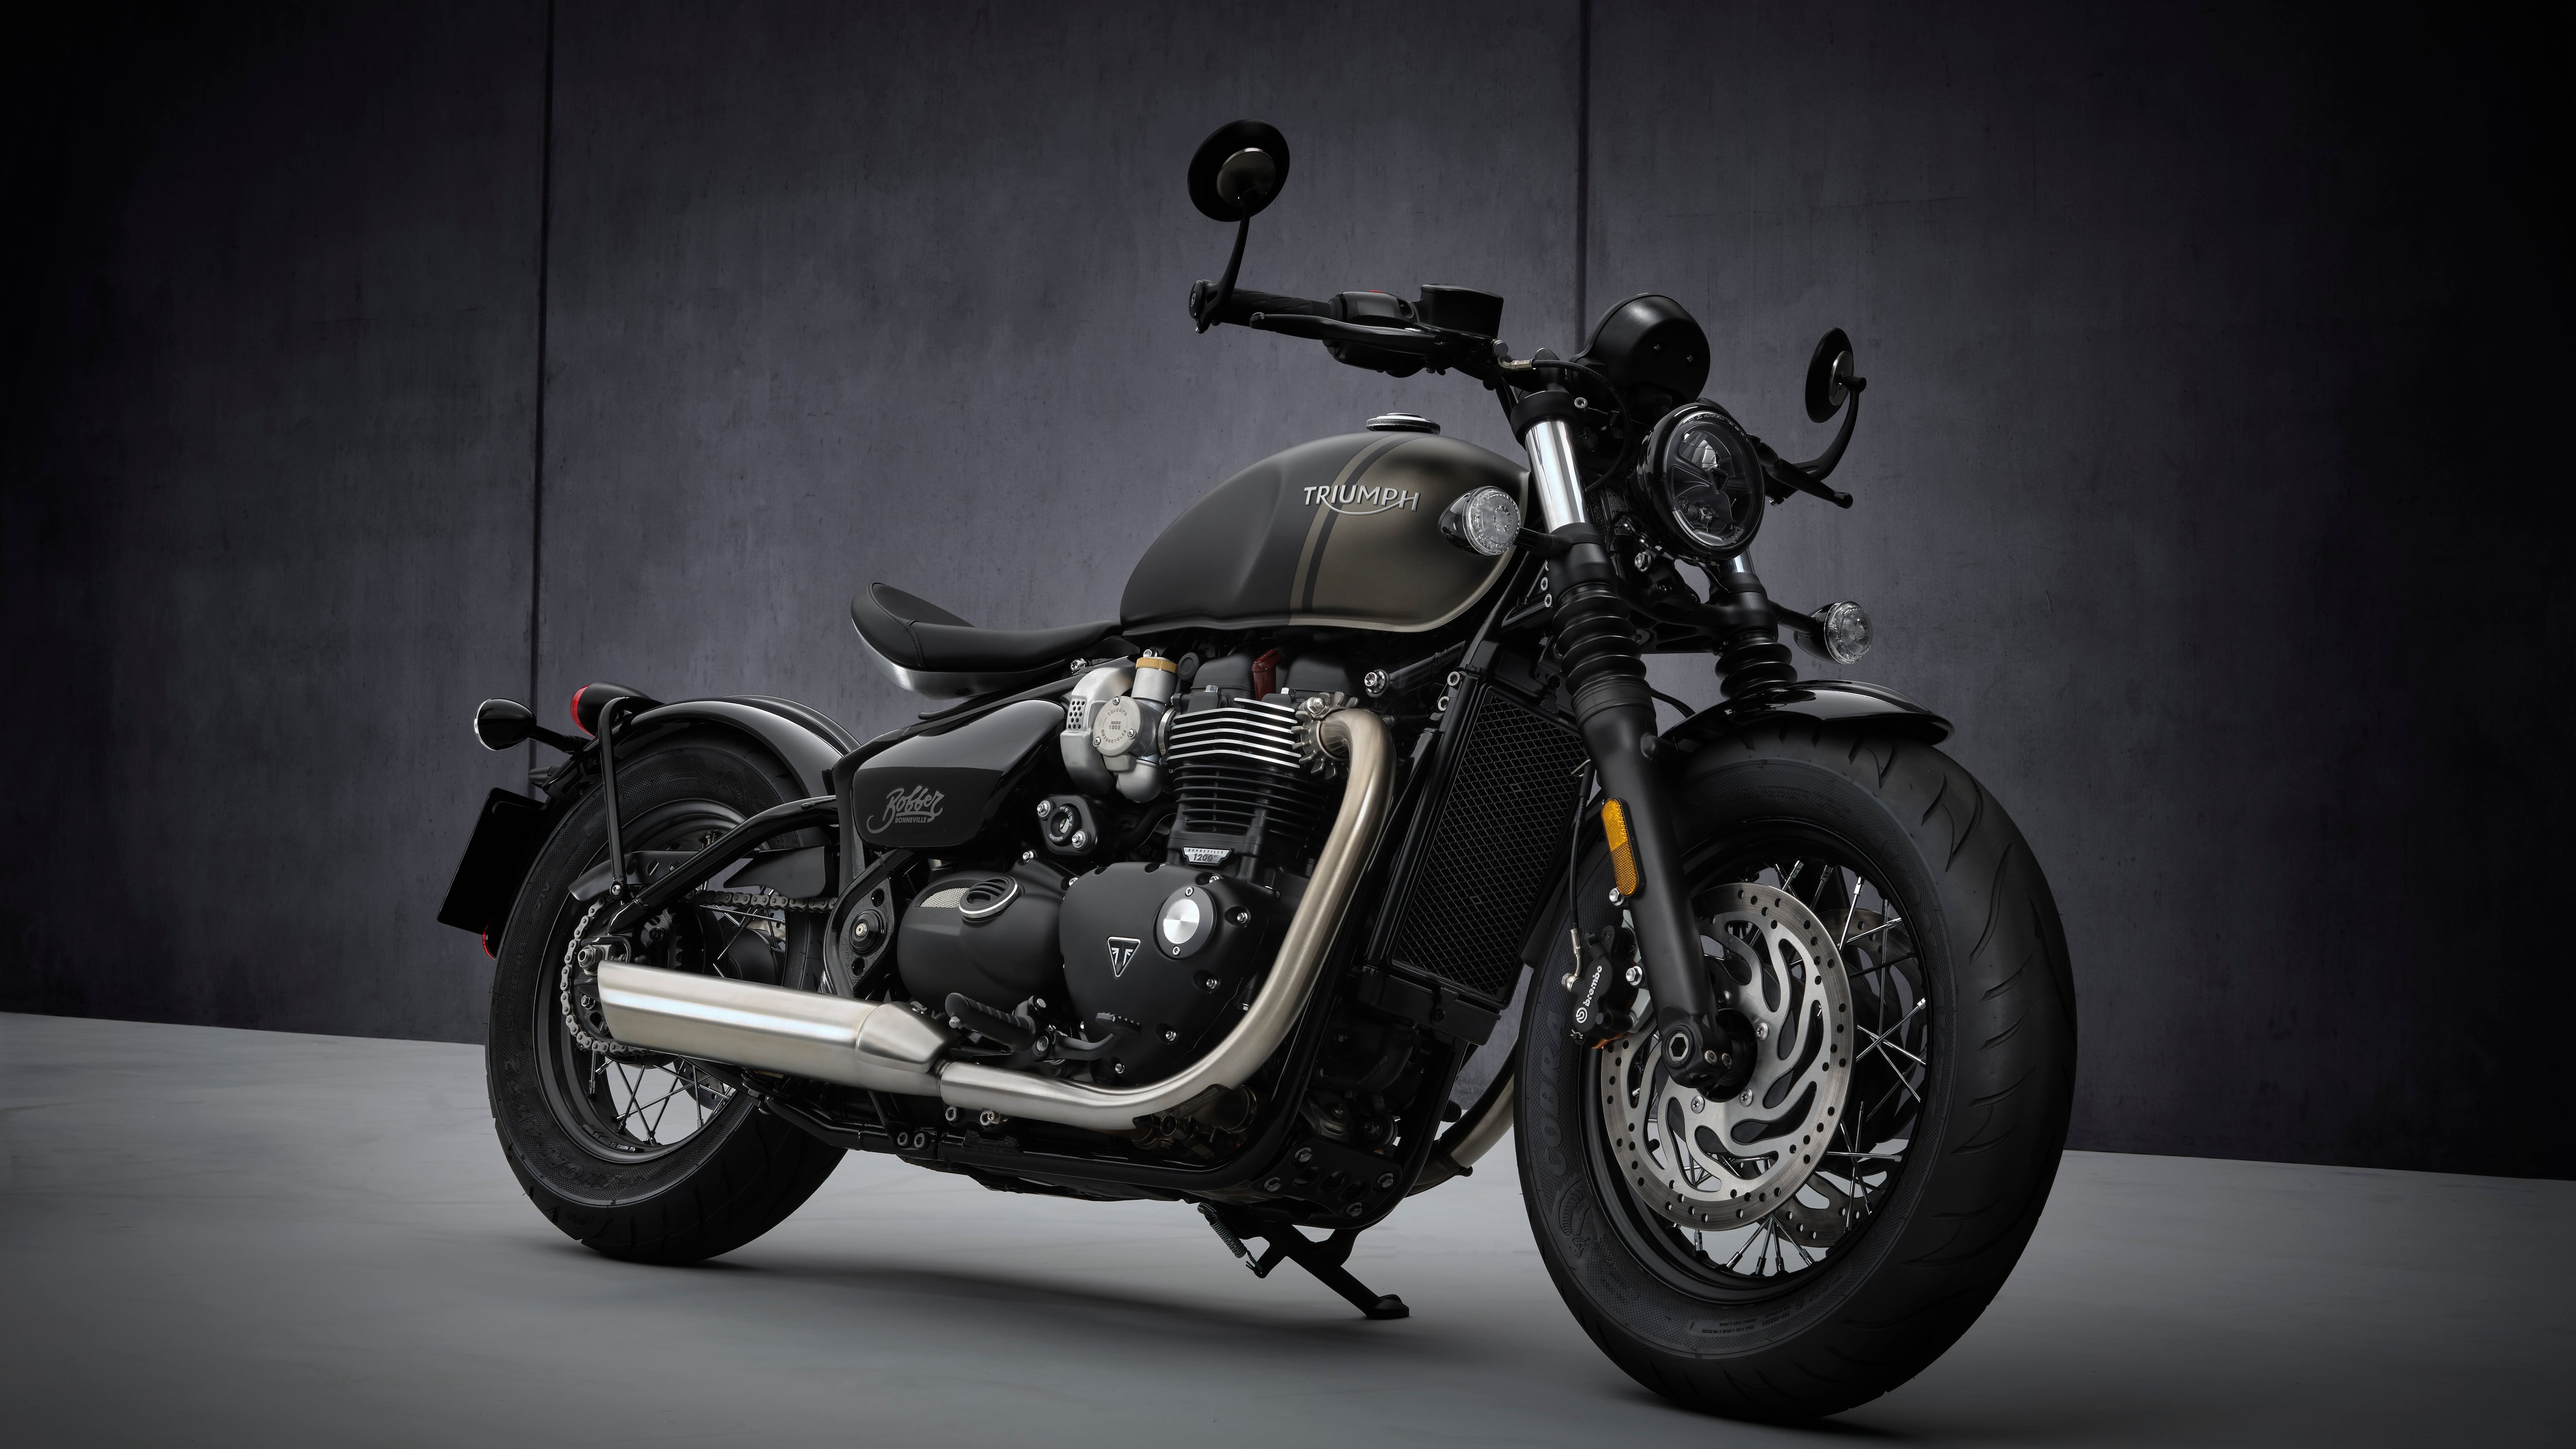 The Bobber’s relaxed ride is core to its appeal